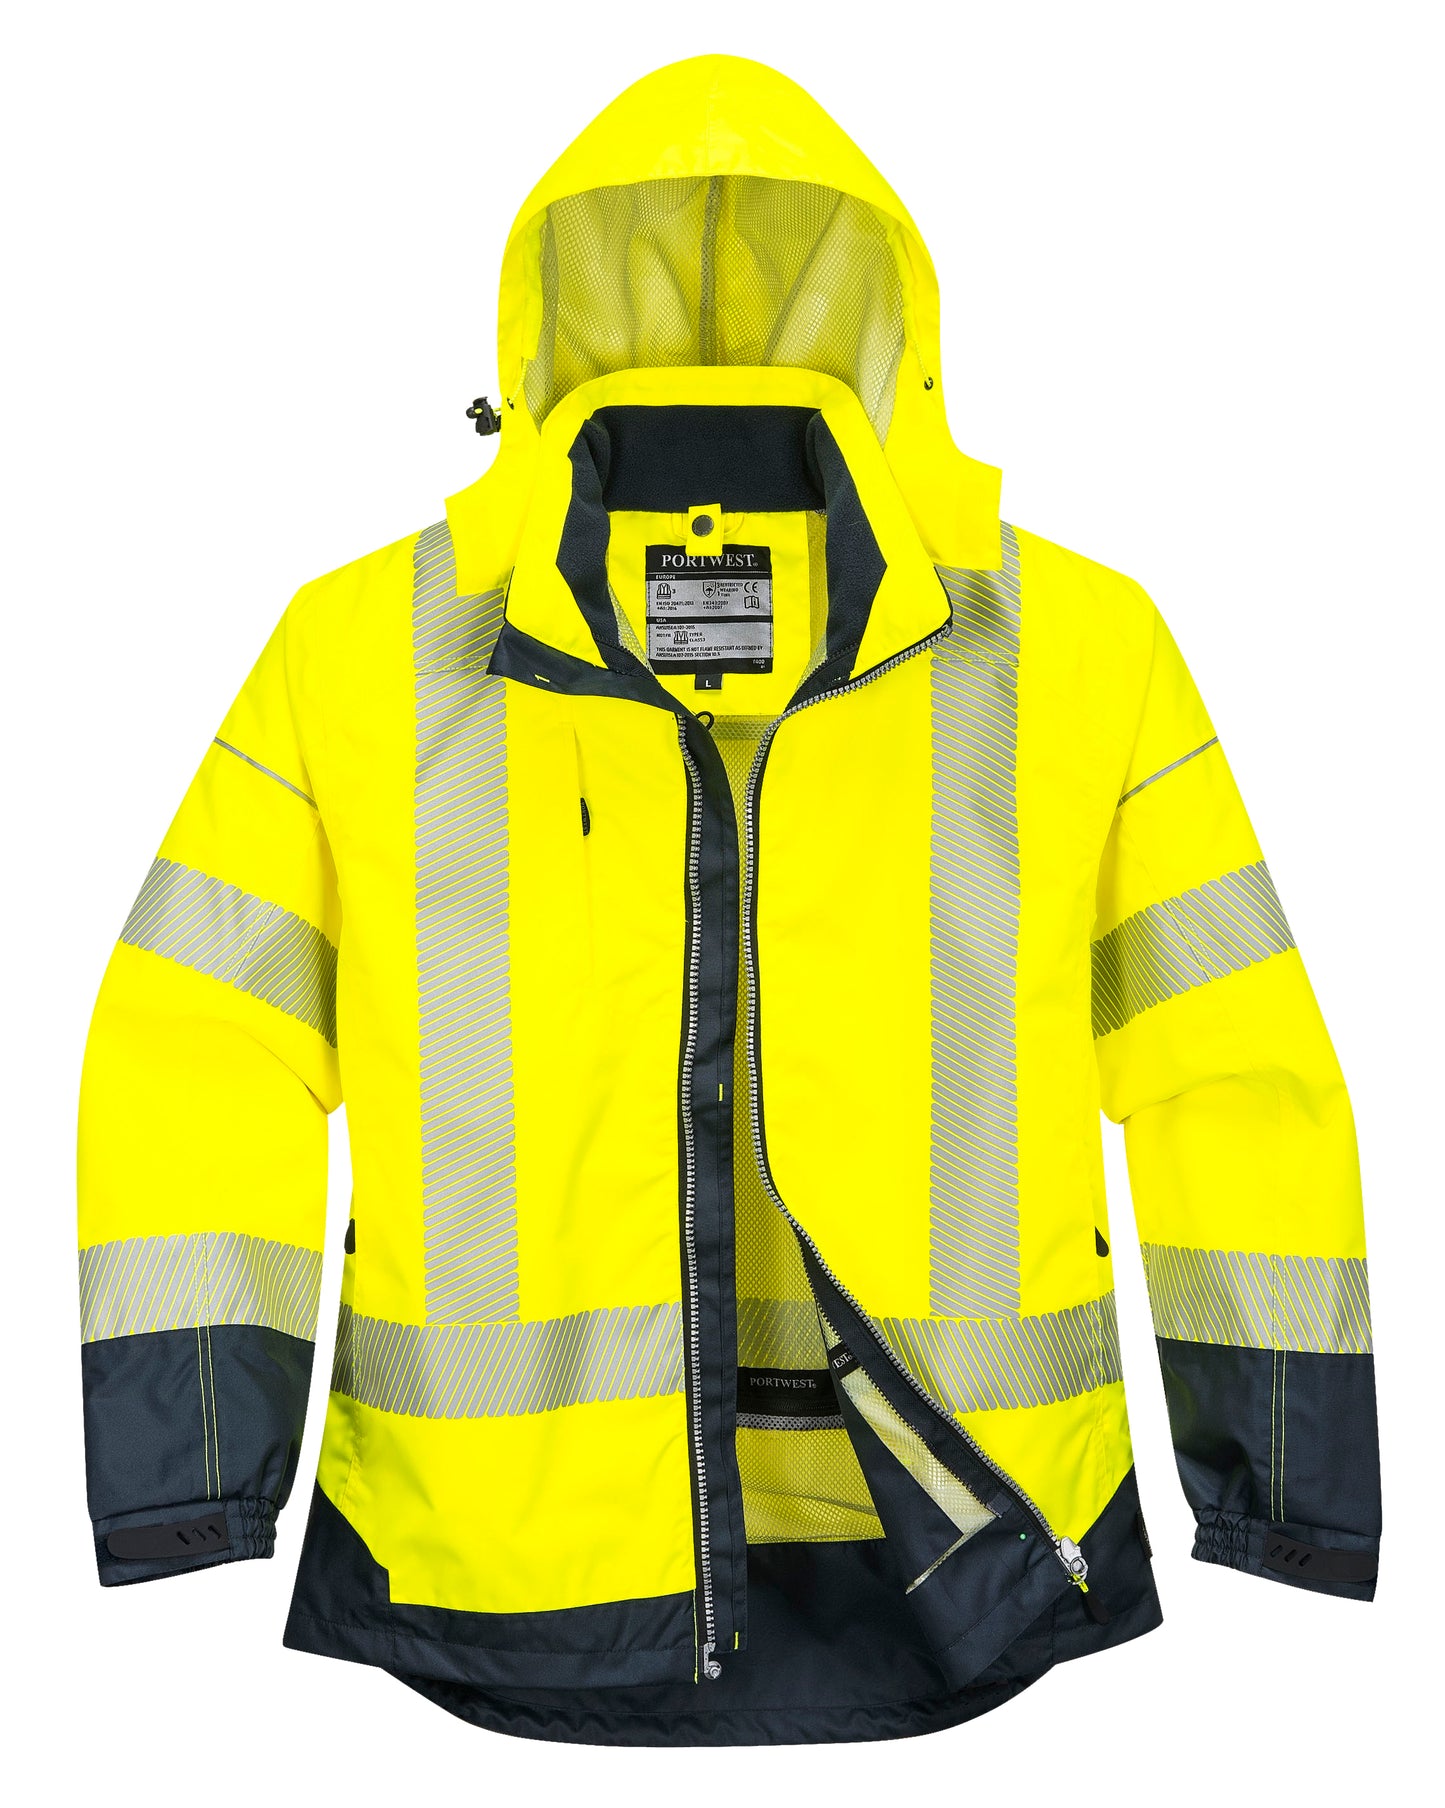 PW3 Hi-Vis Breathable Jacket Yellow/Navy - T403 Front